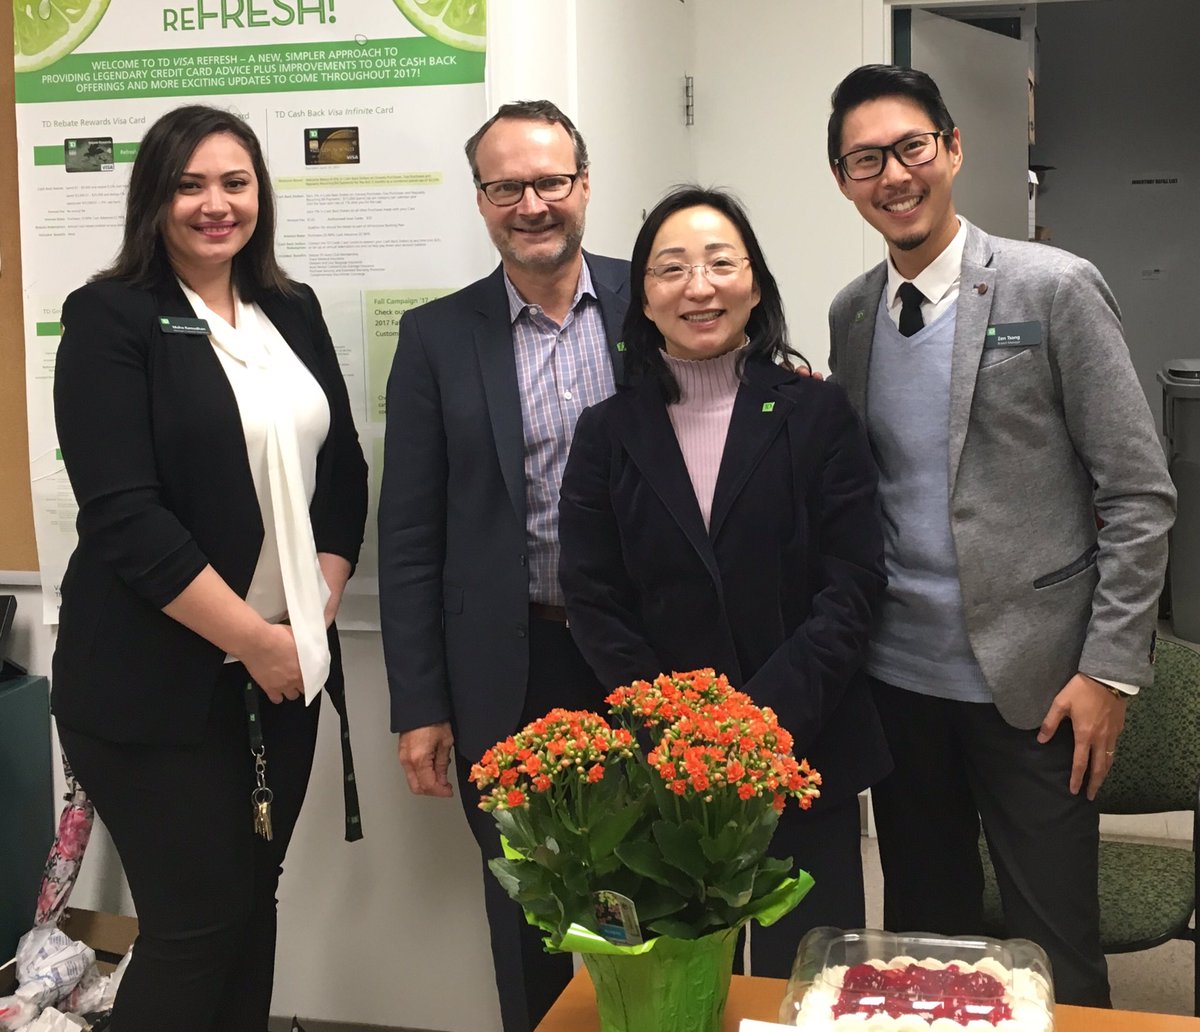 Congratulations to Yventa for attaining the Senior Financial Advisor position @TD_Canada @cityofcoquitlam on Austin & Nelson. Yventa’s breadth of knowledge and commitment to putting her customers first is well known in this community.